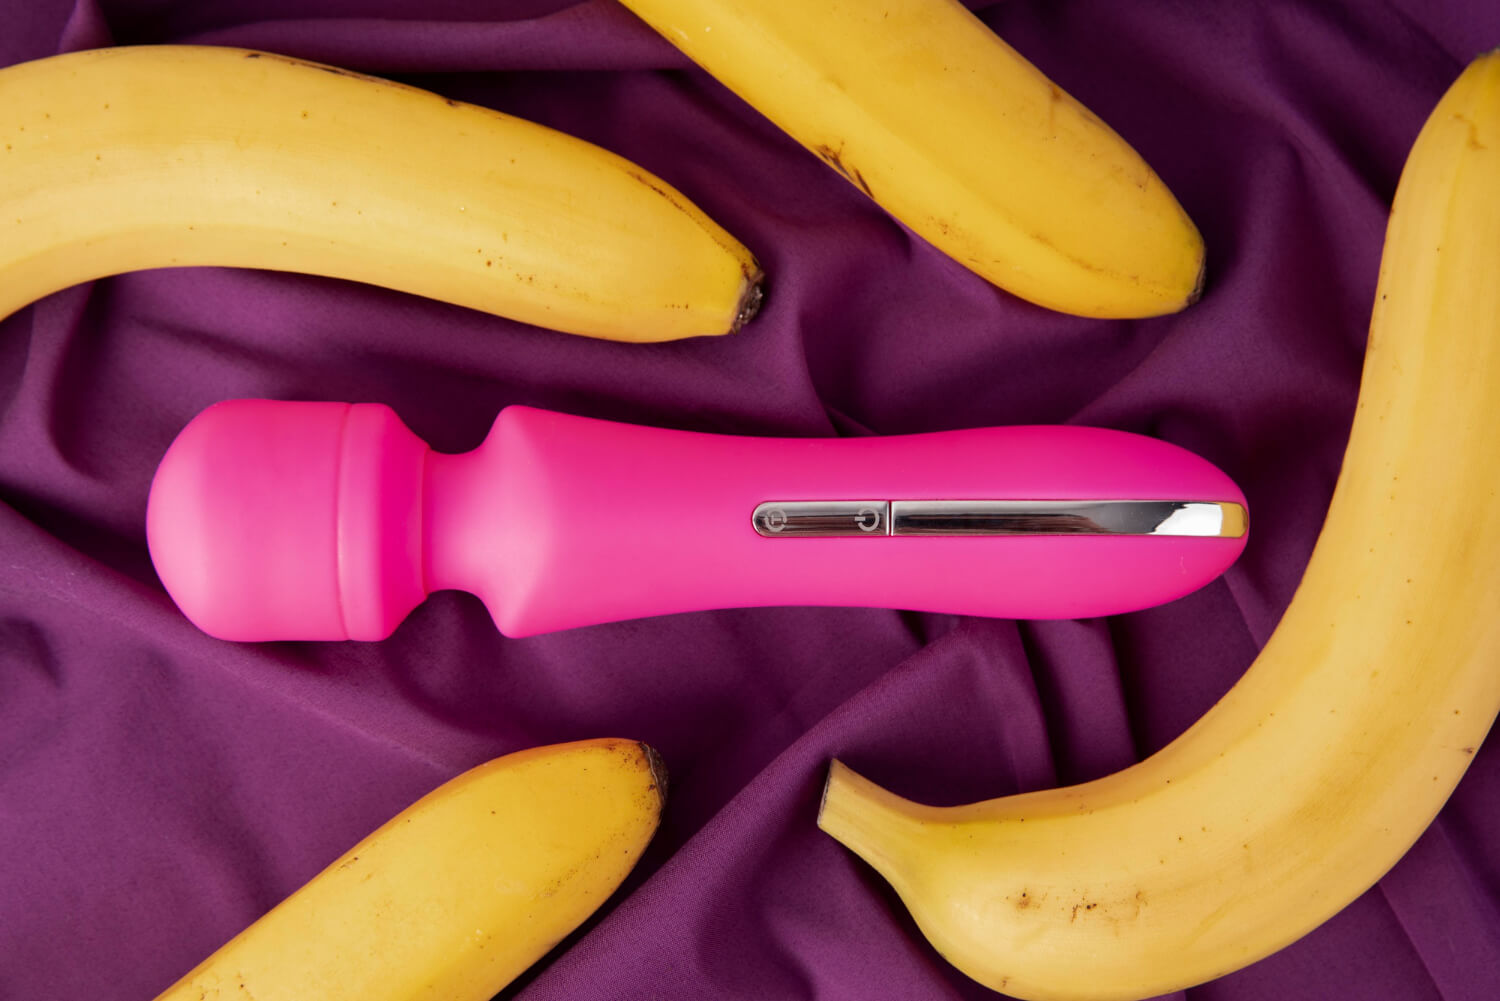 sex toys on amazon? yes - we've picked the prime dildos and vibes on amazon for you